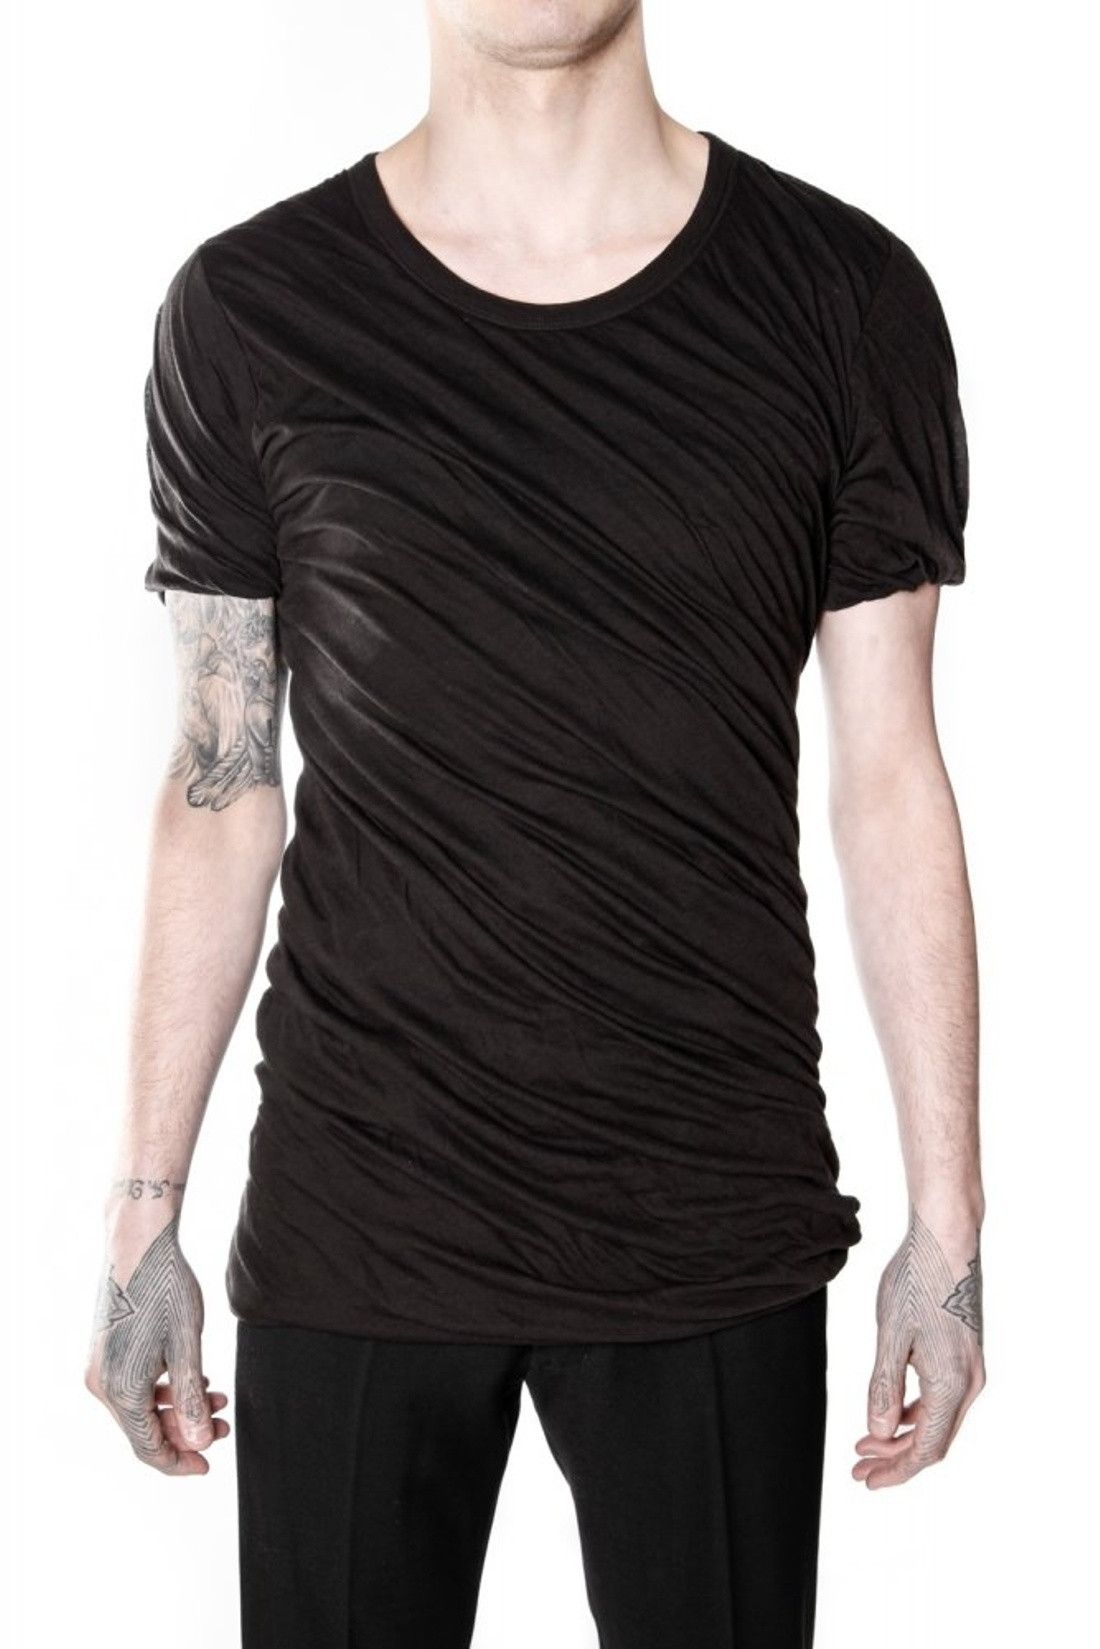 Rick Owens Black Double Layer Short Sleeves Tee Size US S / EU 44-46 / 1 - 1 Preview